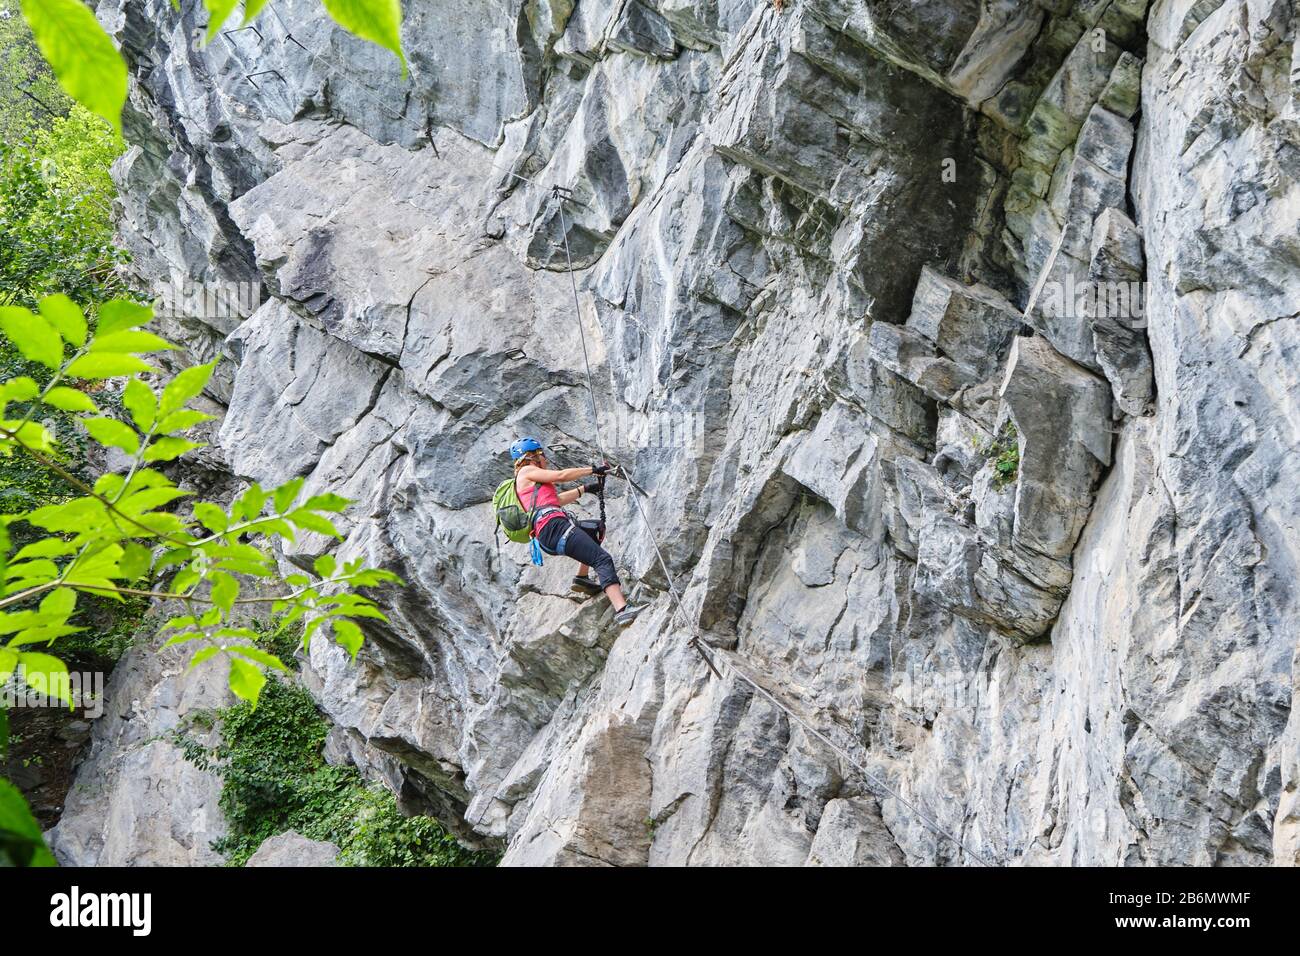 Woman climbing impressive overhanging rock formations on a via ferrata route called Zimmereben (rated D/E - difficult), near Mayrhofen, Zillertal vall Stock Photo